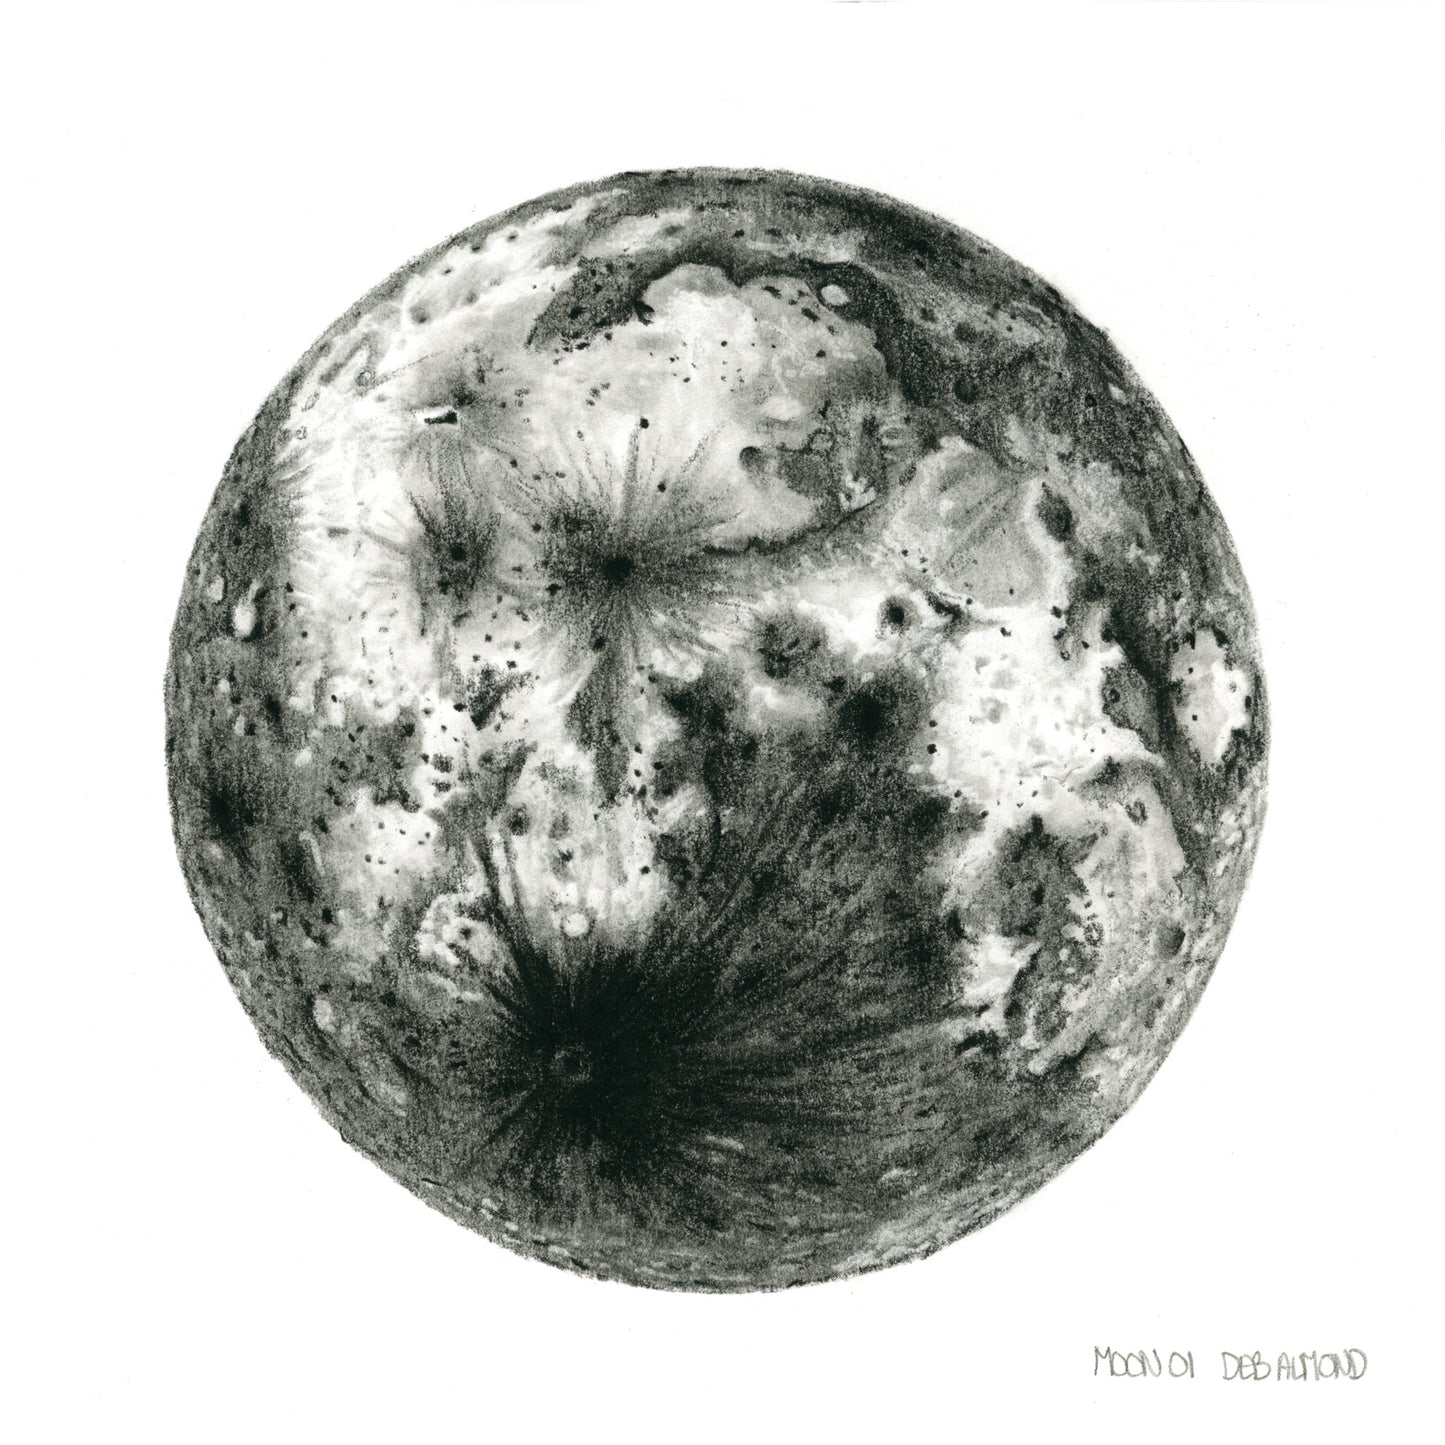 Drawing of the moon in black pastel pencil on white paper.